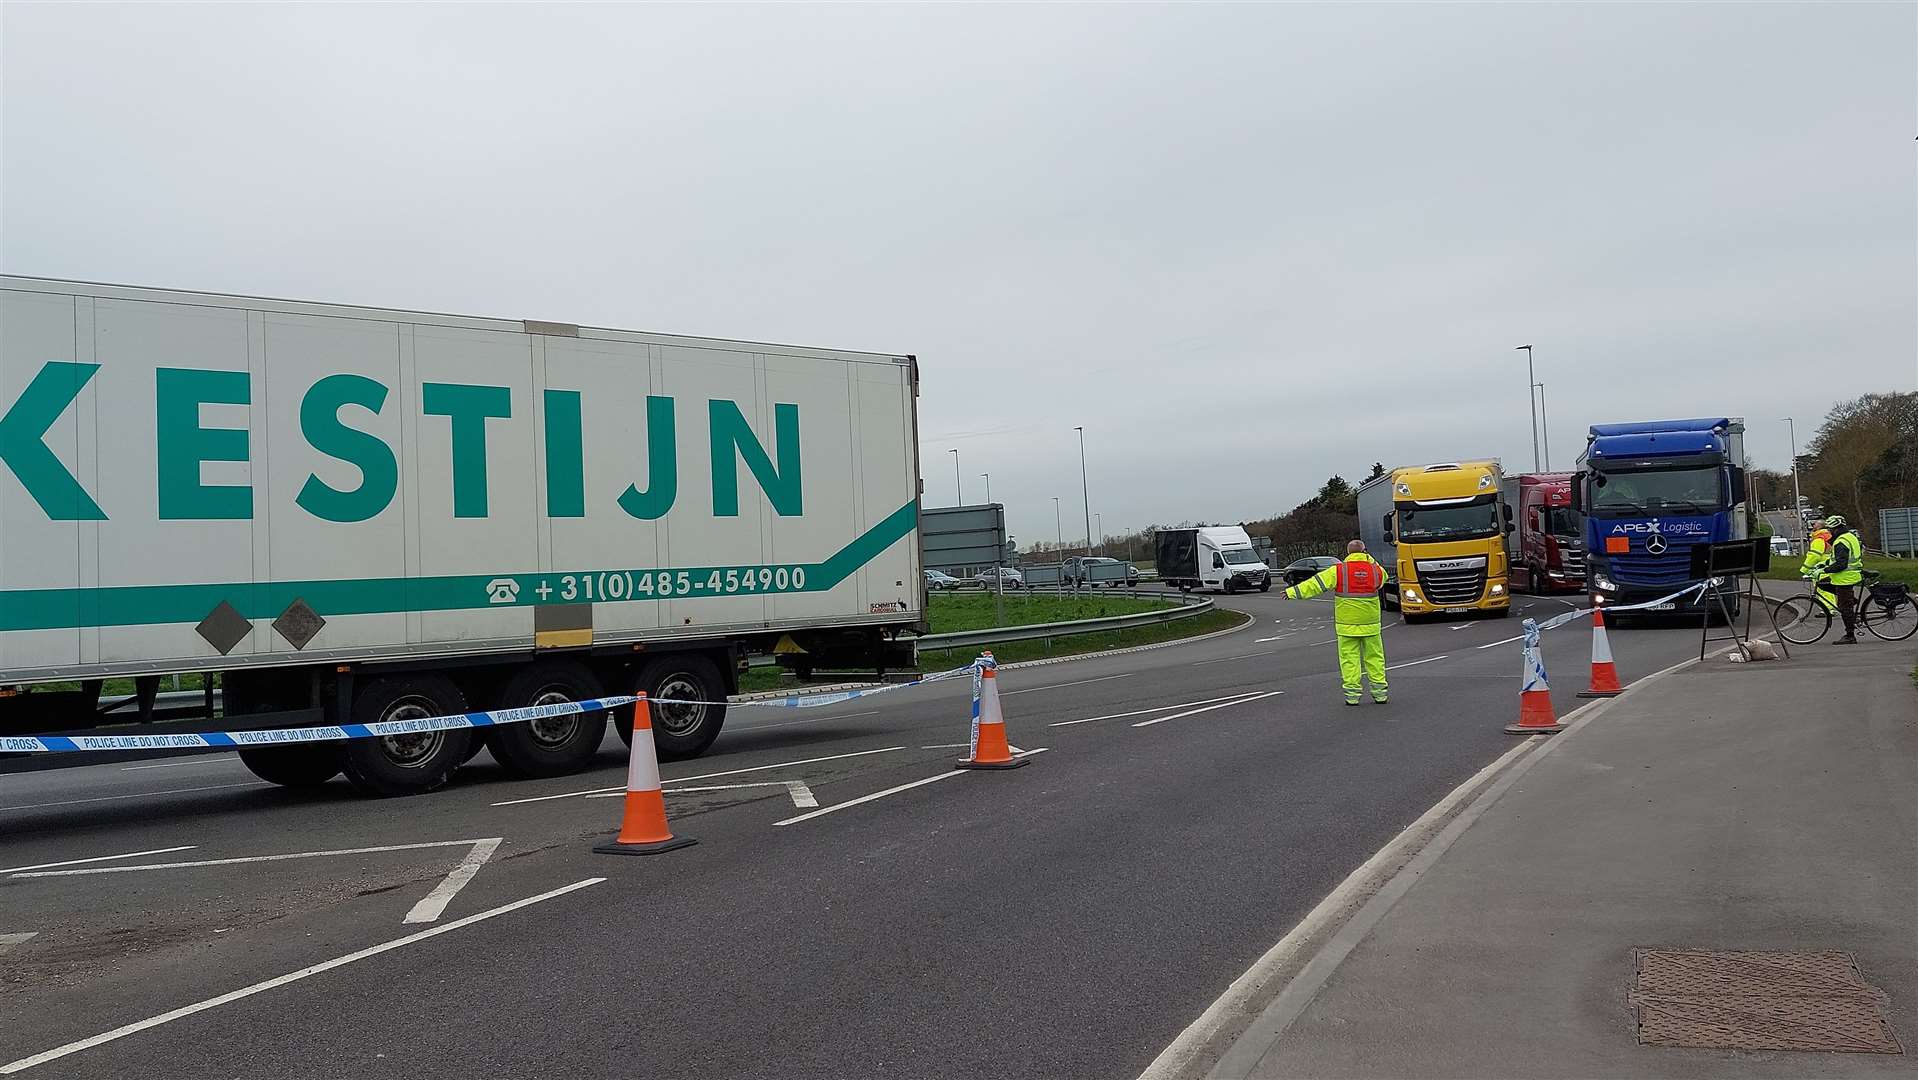 HGVs were turned away from the A20 at Junction 10a